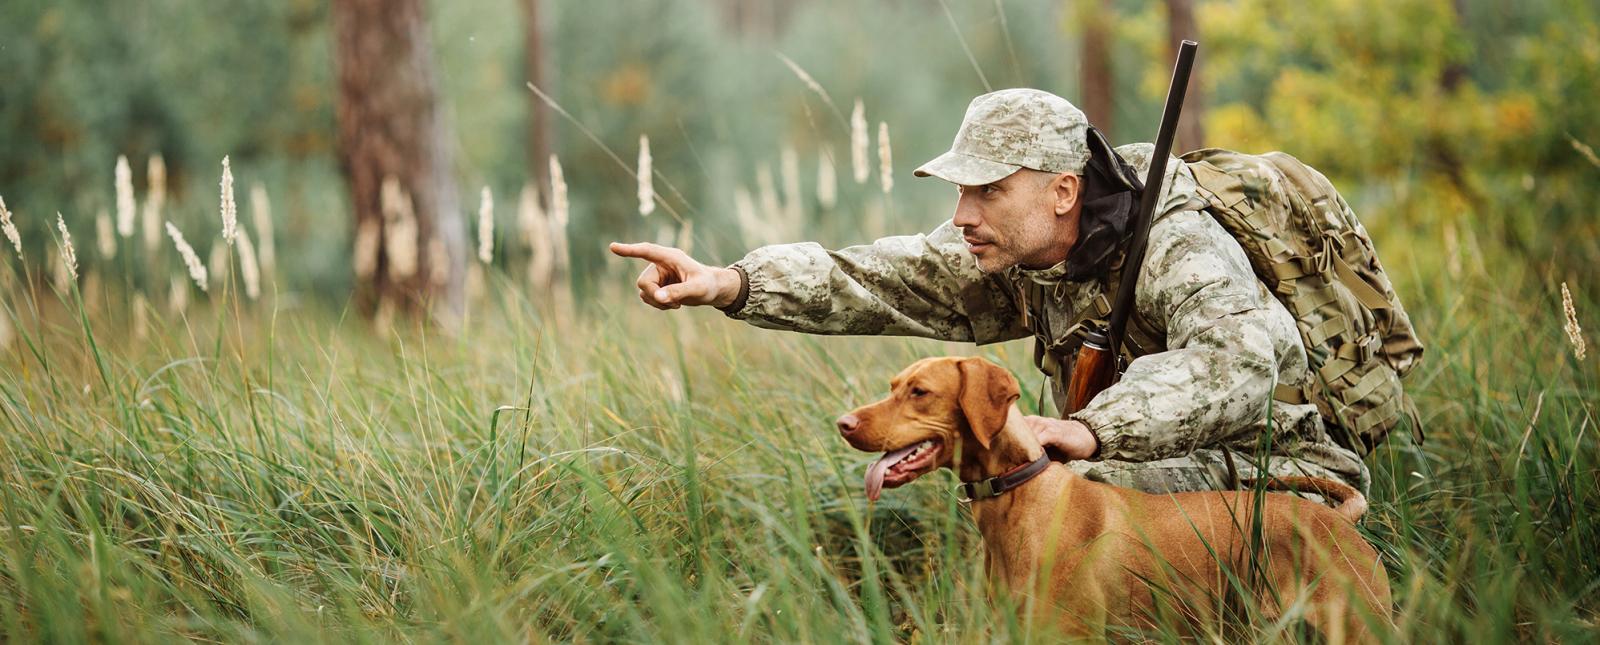 Man pointing out hunt to dog